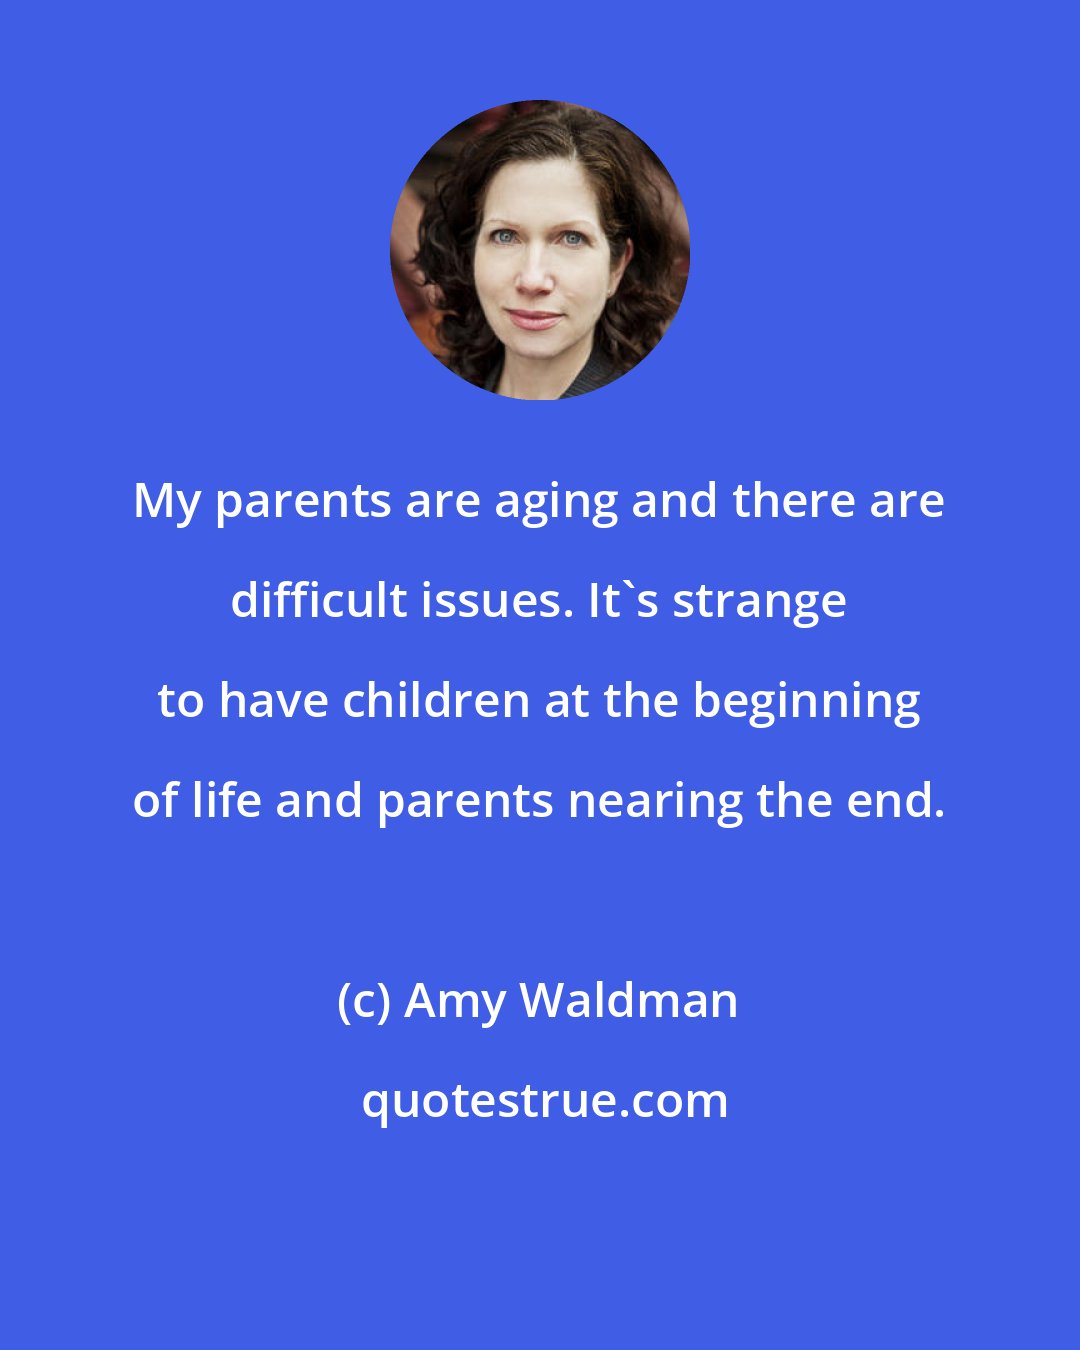 Amy Waldman: My parents are aging and there are difficult issues. It's strange to have children at the beginning of life and parents nearing the end.